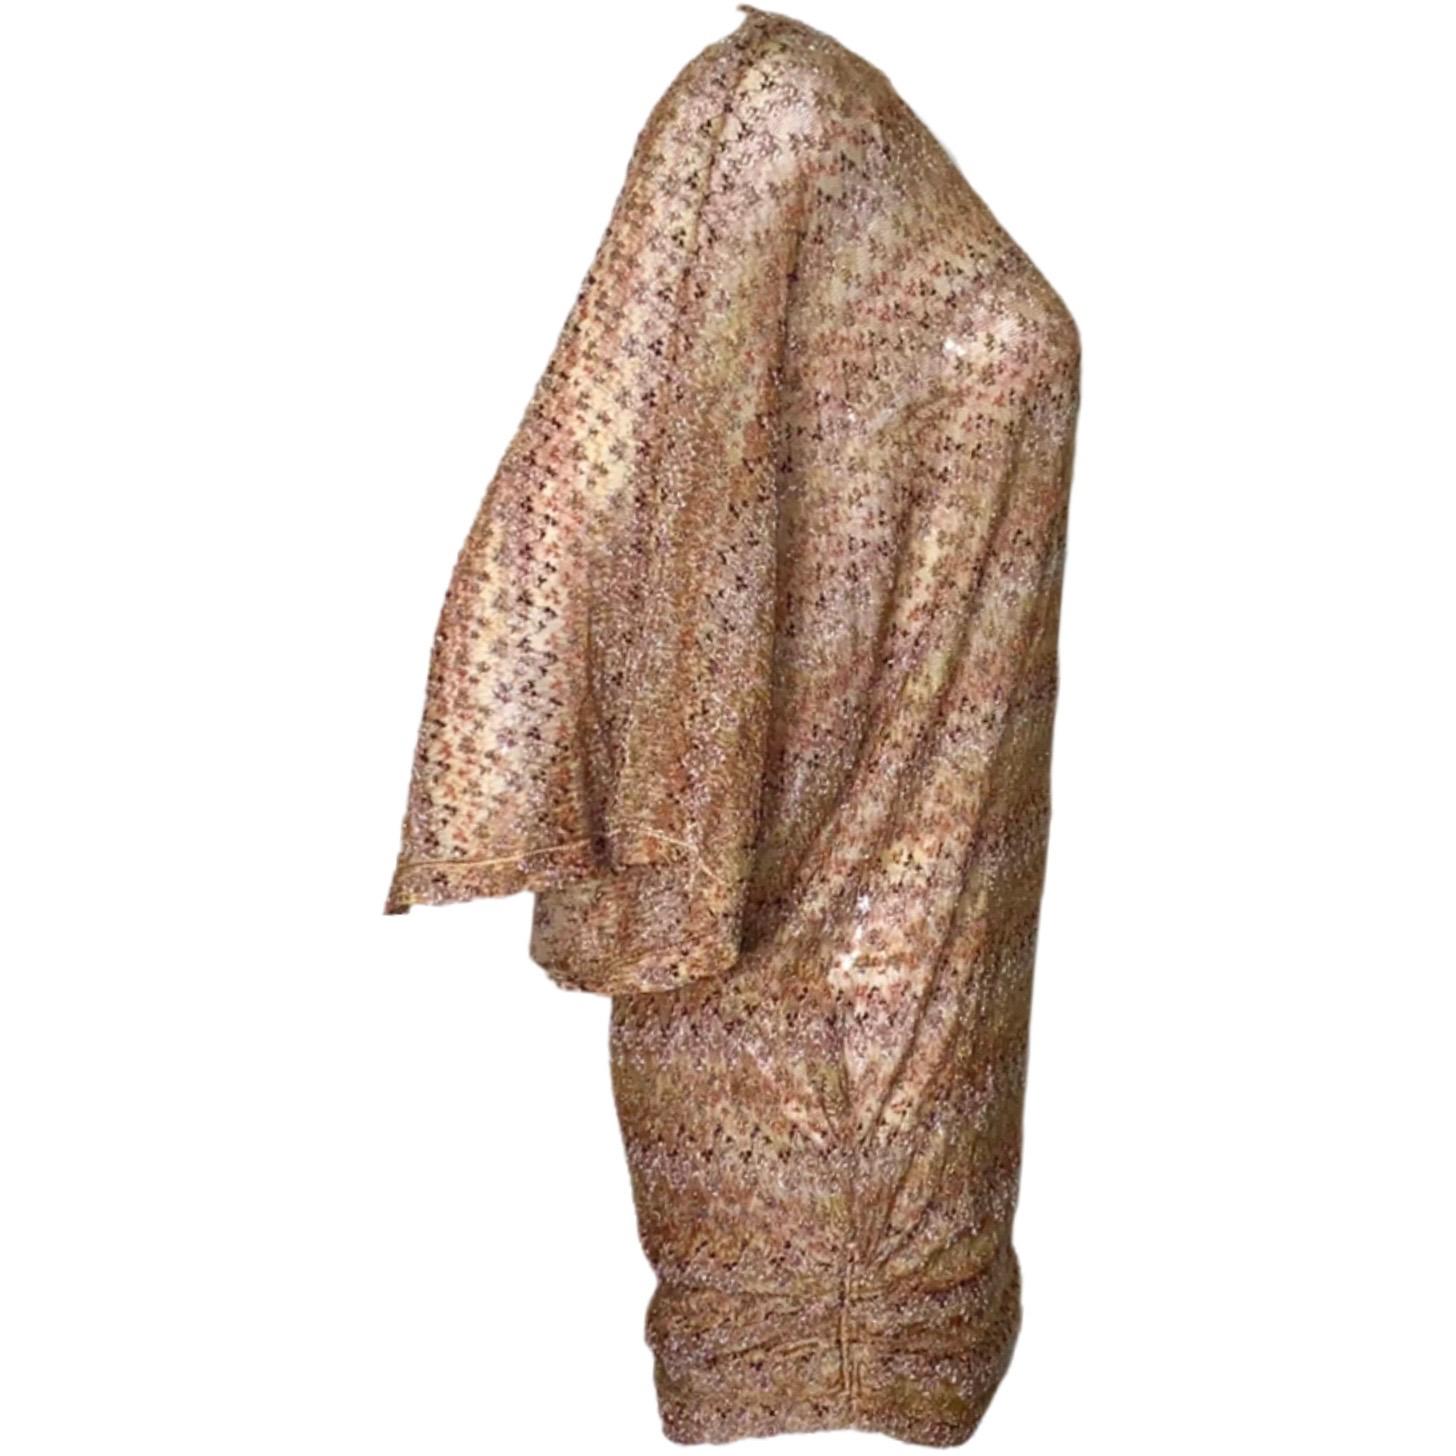 Beautiful metallics lurex MISSONI kaftan dress
Classic MISSONI signature knit
Simply slips on
Wrap style
V-Neck
Batwing sleeves
Crochet-knit details - so beautiful!
Dry Clean only
Made in Italy
Size 40
New & unworn